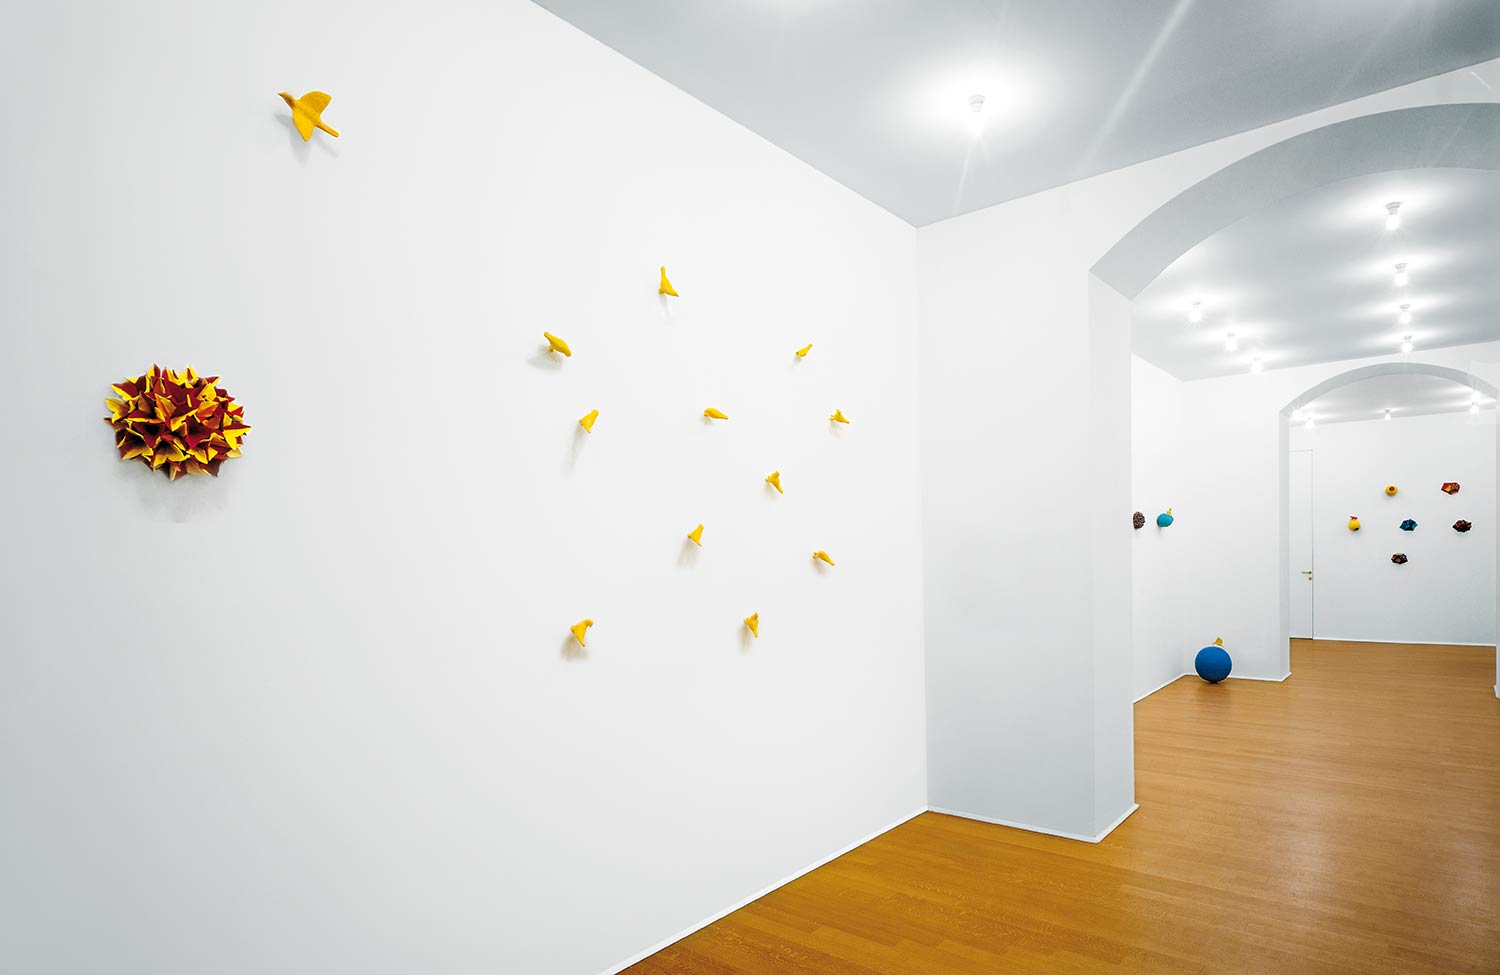 installation by Kazumasa Mizokami to express the sense of movement of air   which uses 18 yellow birds that attached to the wall at the Galleria Toselli in Milan 2002. photo by Stefano Cavallo